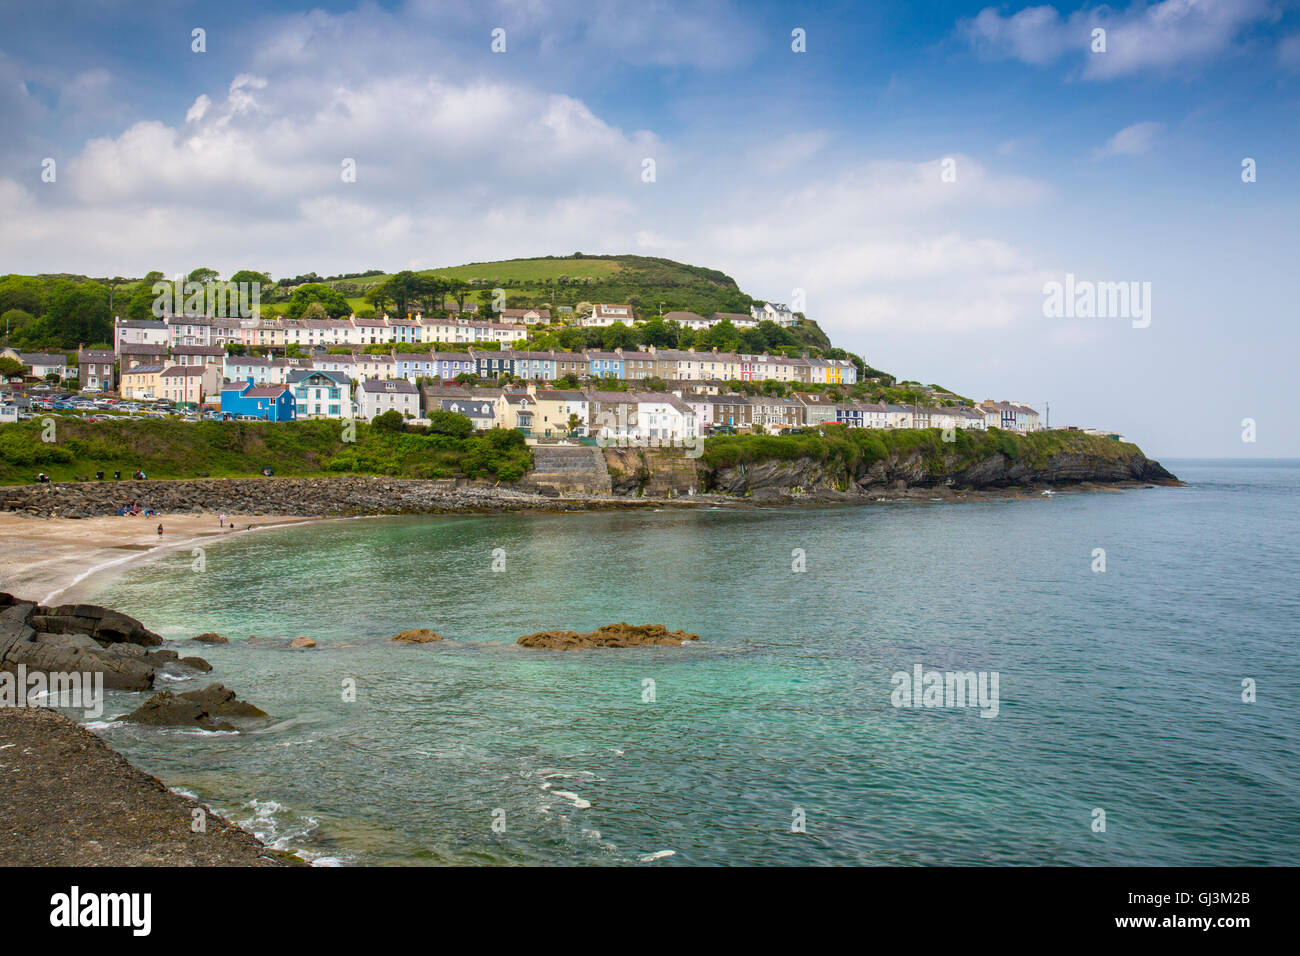 Rows of colourful terraced houses in New Quay, Ceredigion, Mid Wales, UK Stock Photo